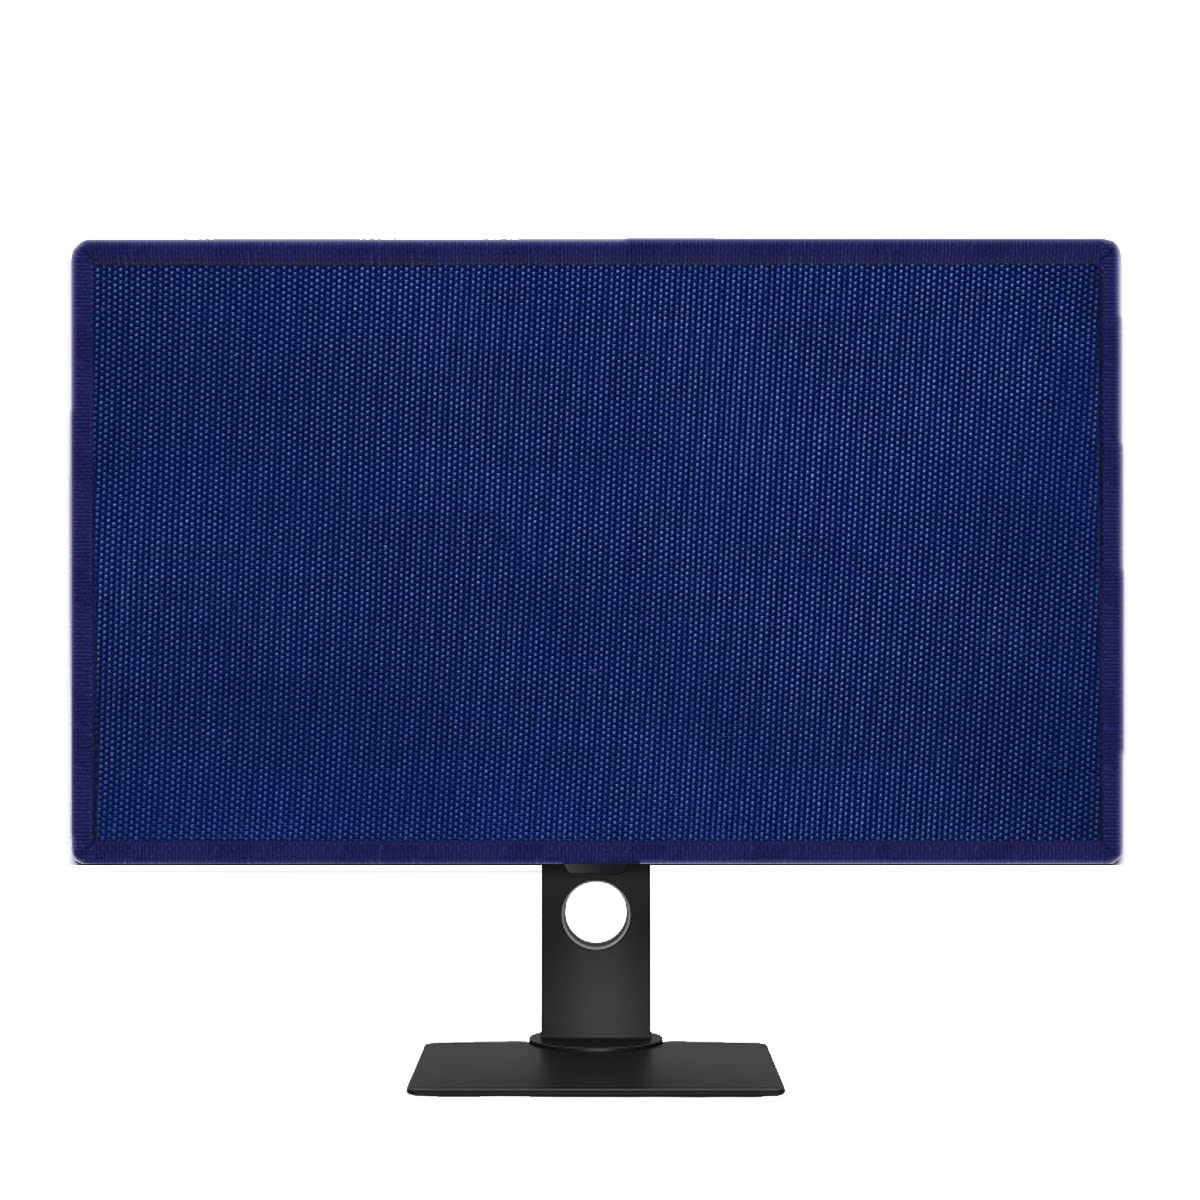 PalaP Dust Proof Monitor Cover for MSIOptix 23.8 inches Monitor